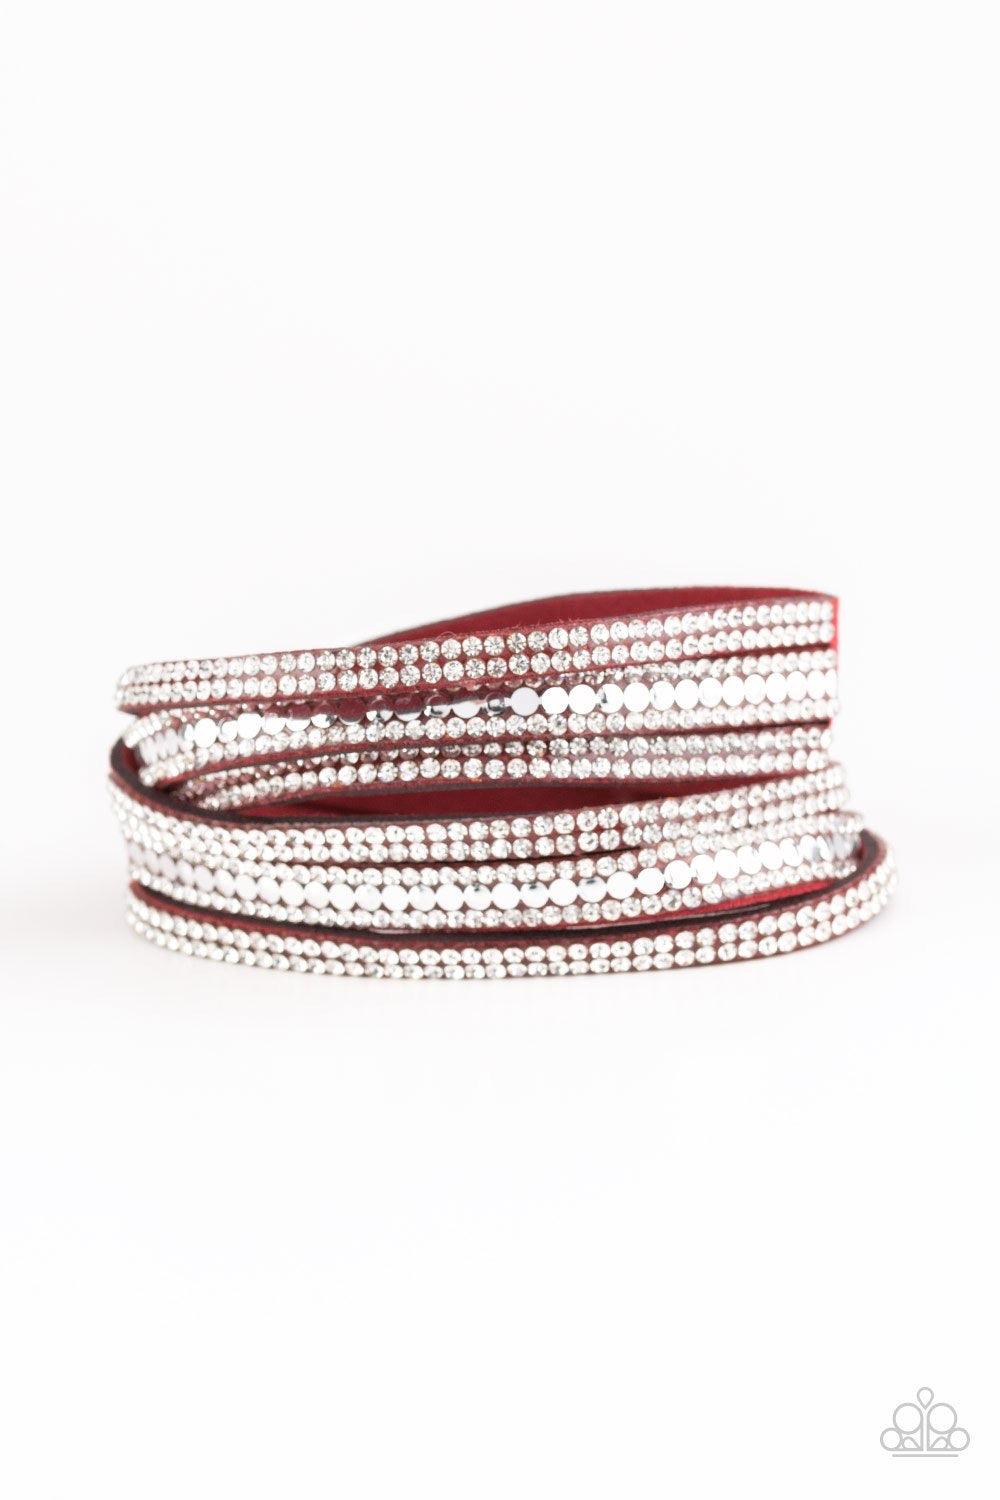 Paparazzi Accessories Rock Star Attitude - Red Encrusted in rows of glassy white rhinestones and flat silver studs, three strands of red suede wrap around the wrist for a sassy look. The elongated band allows for a trendy double wrap around the wrist. Fea